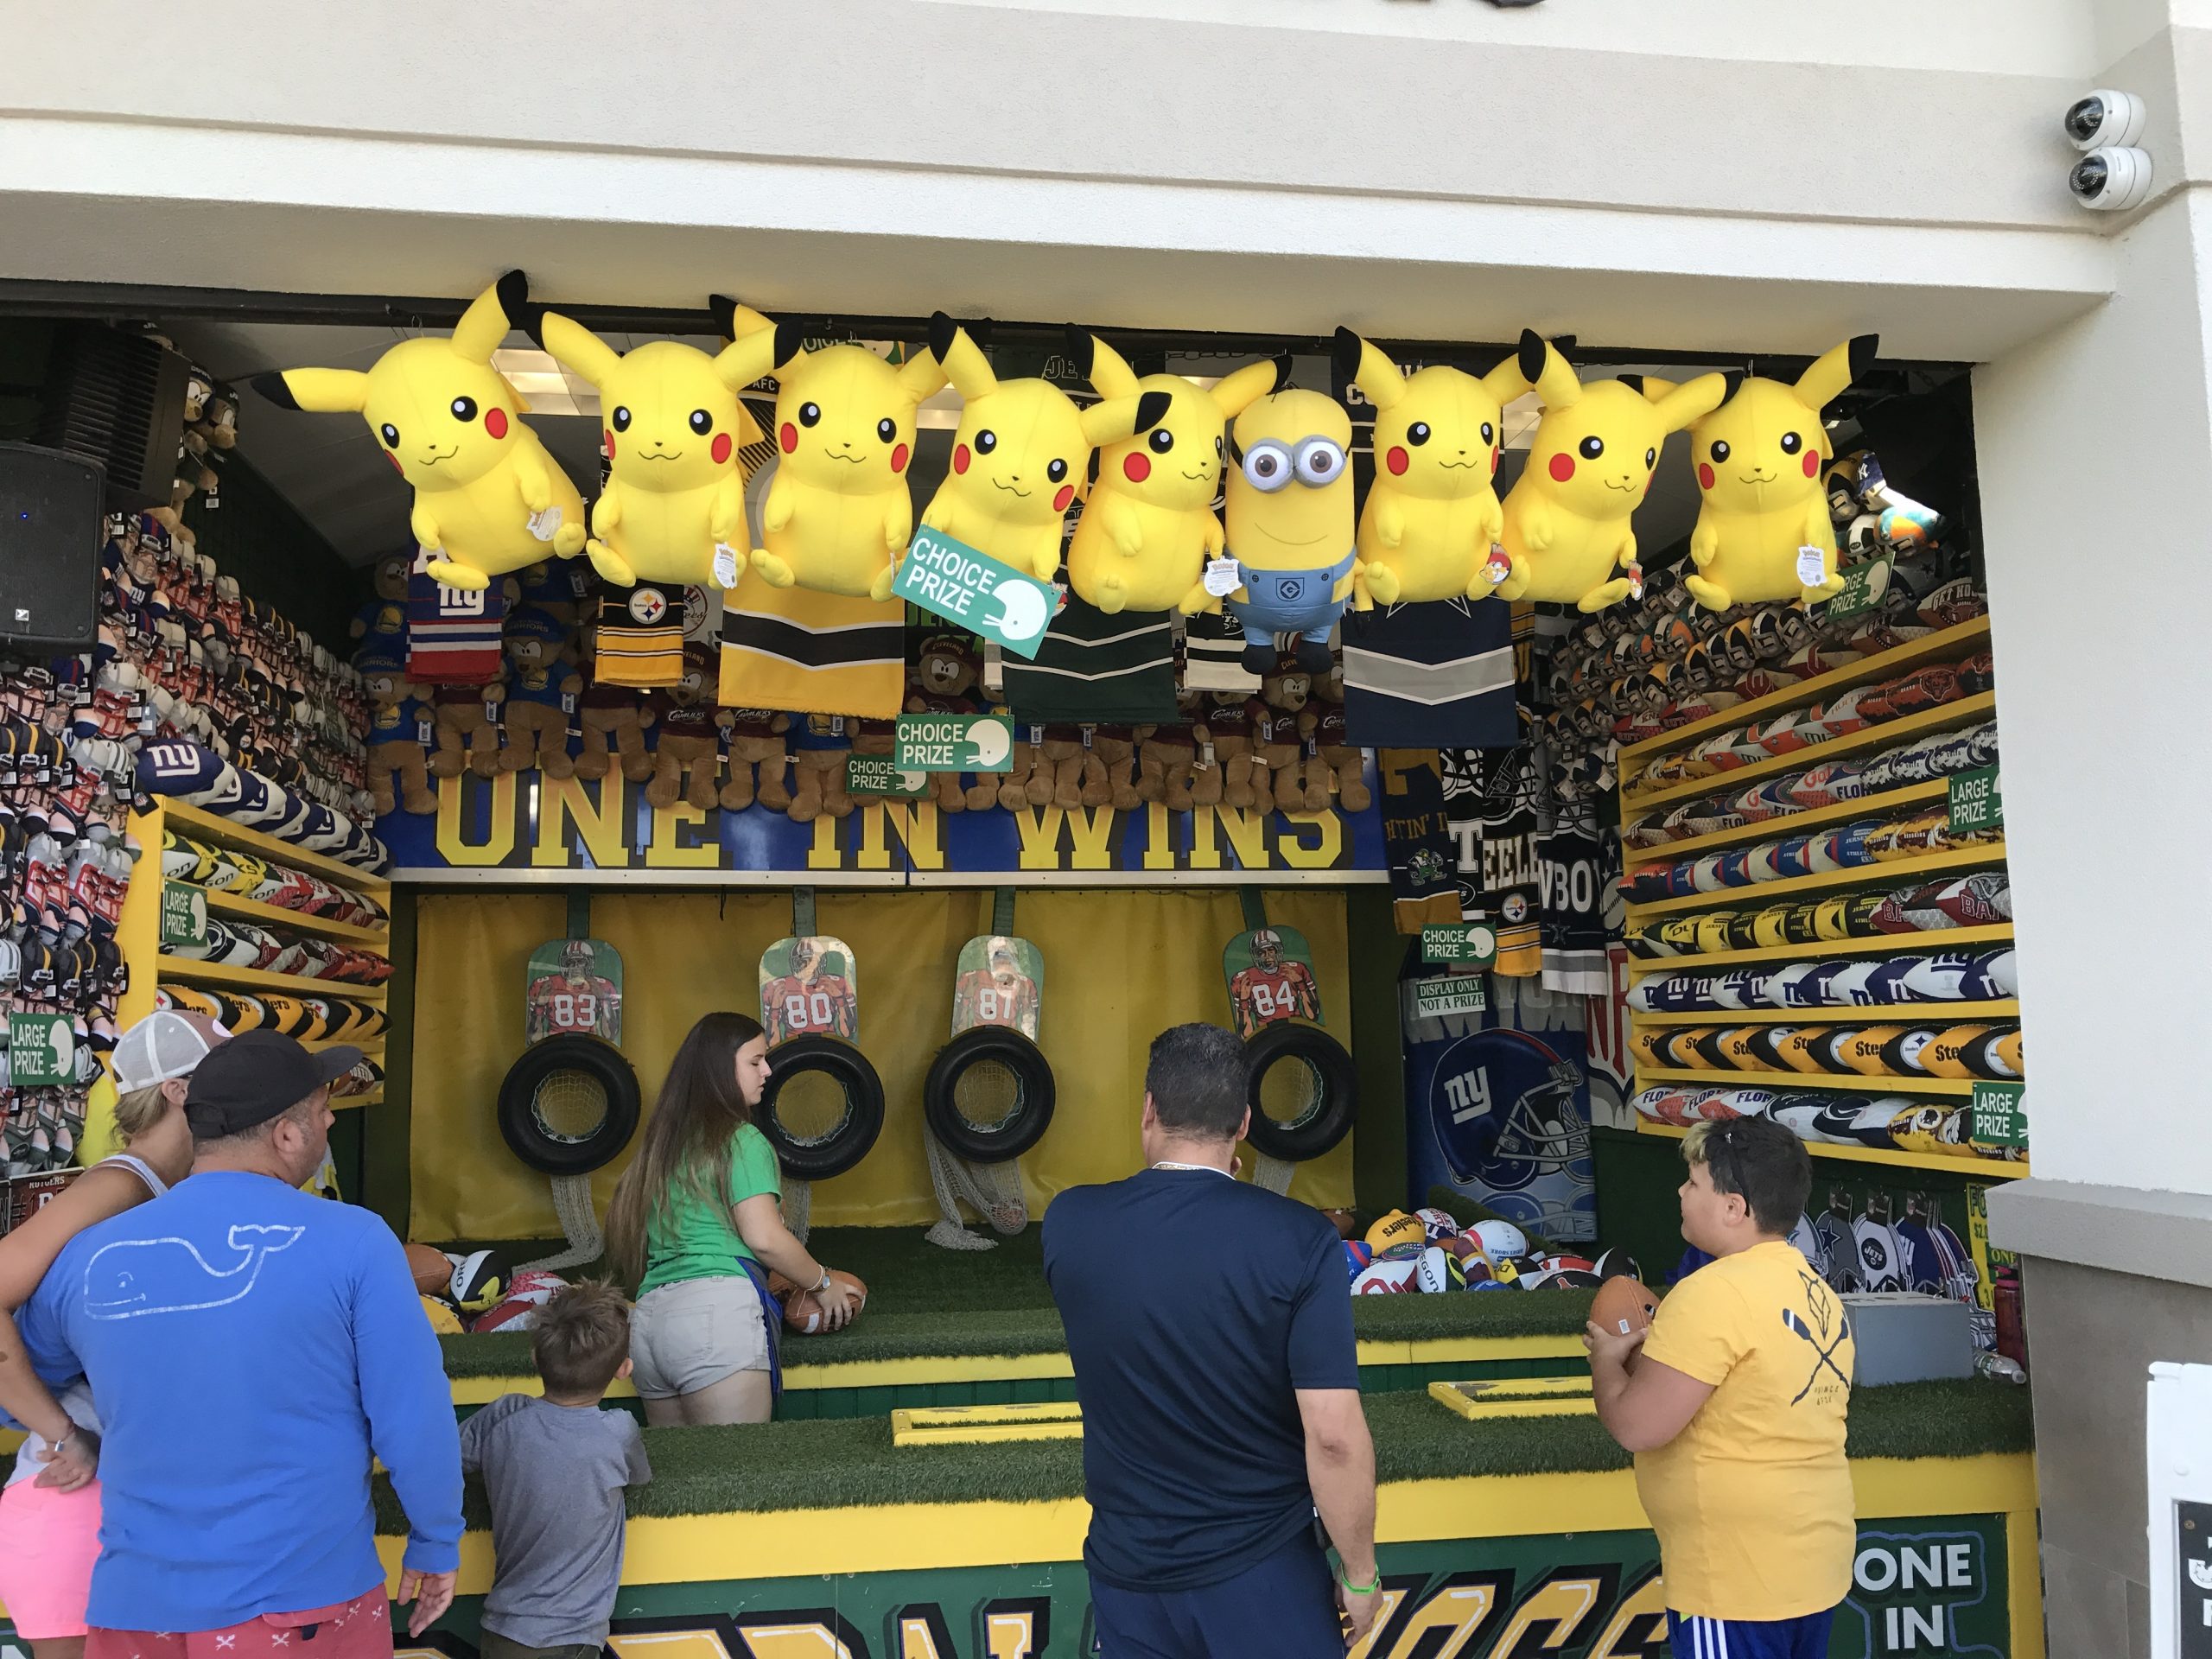 Pikachus and a Minion prizes at a game booth @ Point Pleasant, NJ